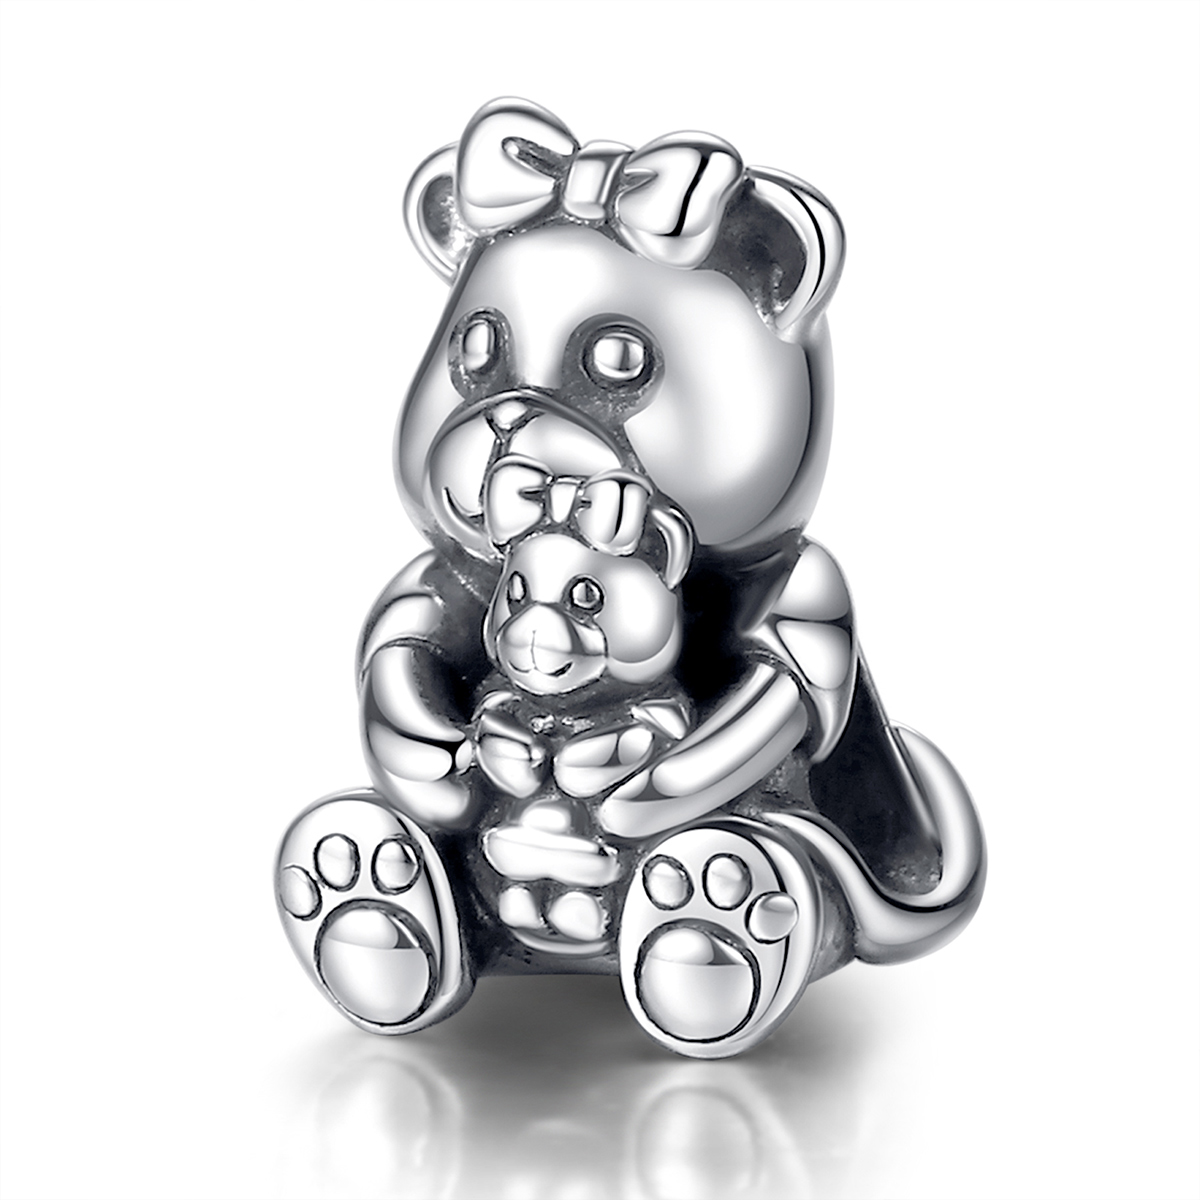 Merryshine Jewelry High Quality Little Bear Design 925 Sterling Silver Beads for Bracelet Jewellery Making